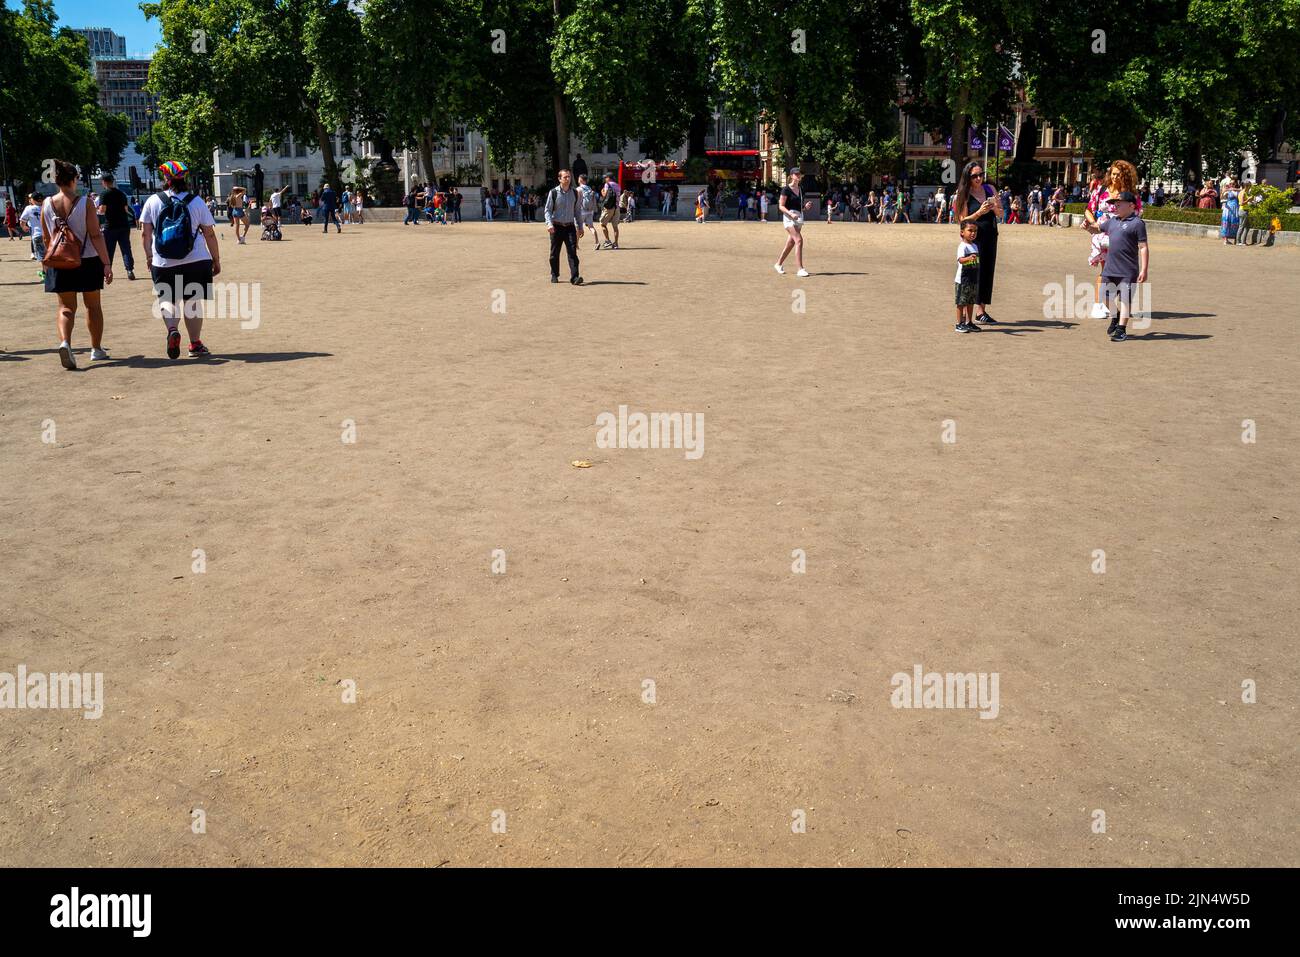 Parched area of Parliament Square, Westminster, London, UK, which is normally grass covered but has turned to dry dust in heatwave dry spell Stock Photo